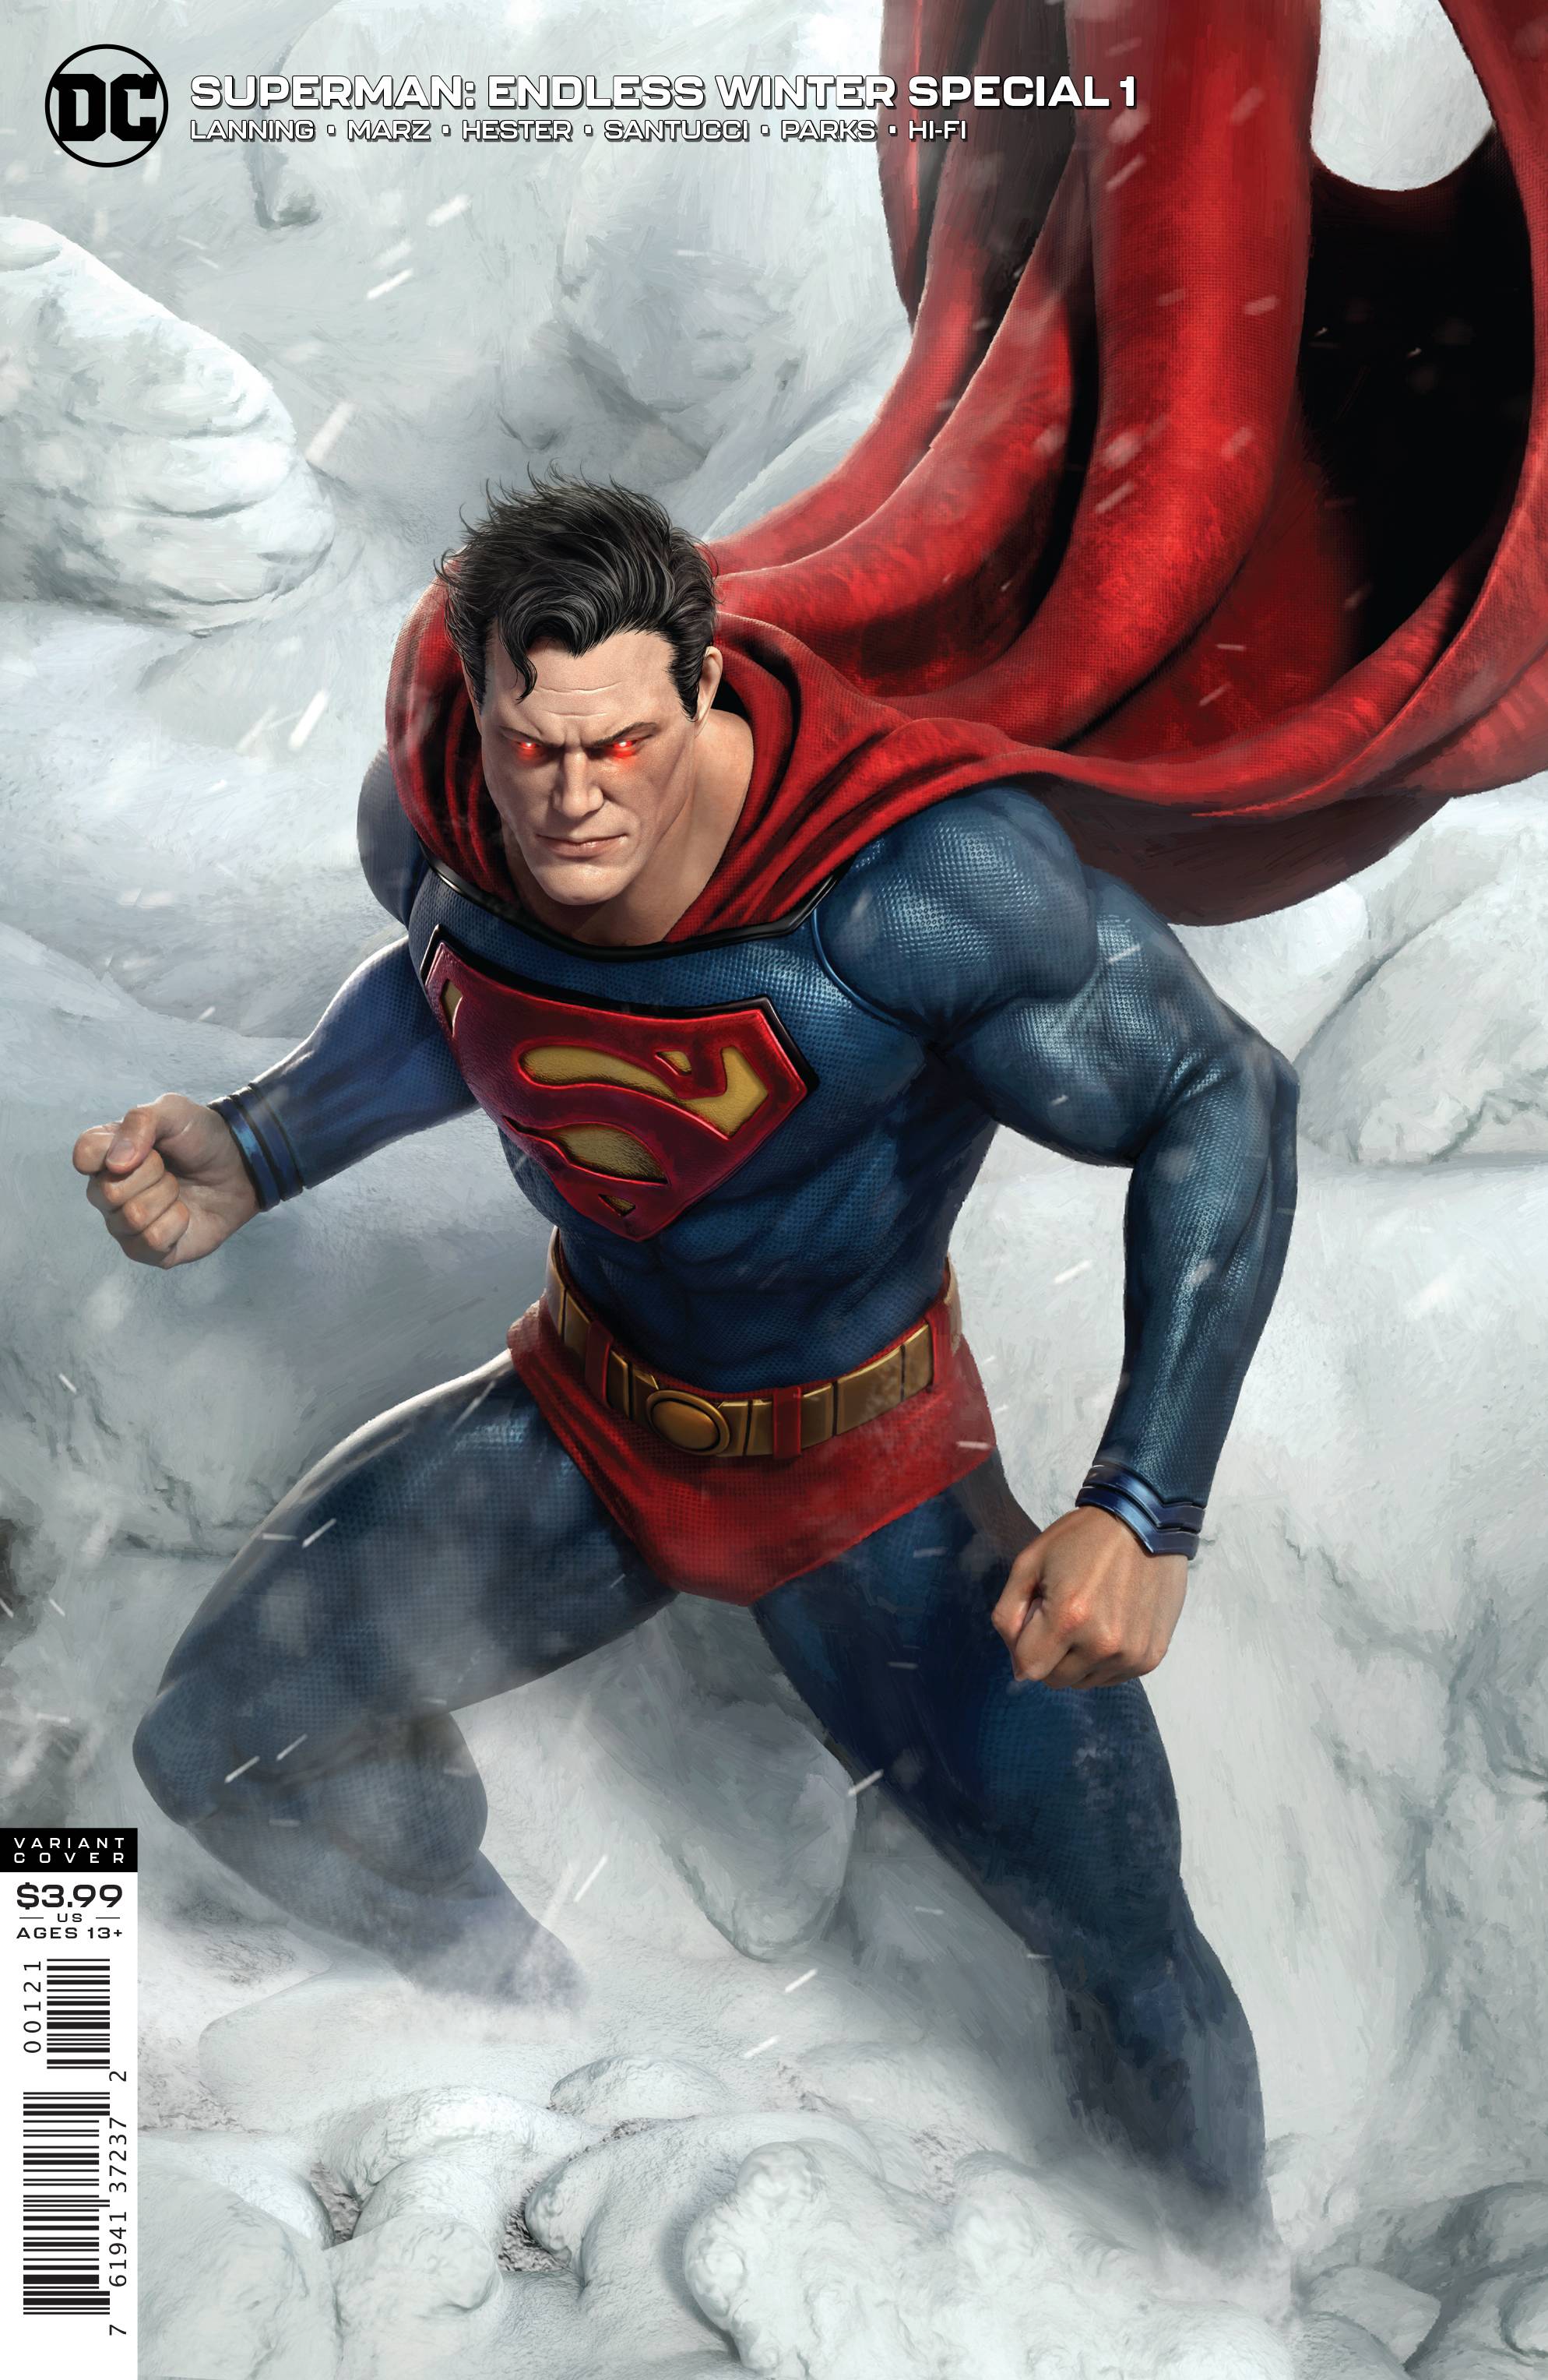 SUPERMAN ENDLESS WINTER SPECIAL #1 VAR ED | Game Master's Emporium (The New GME)